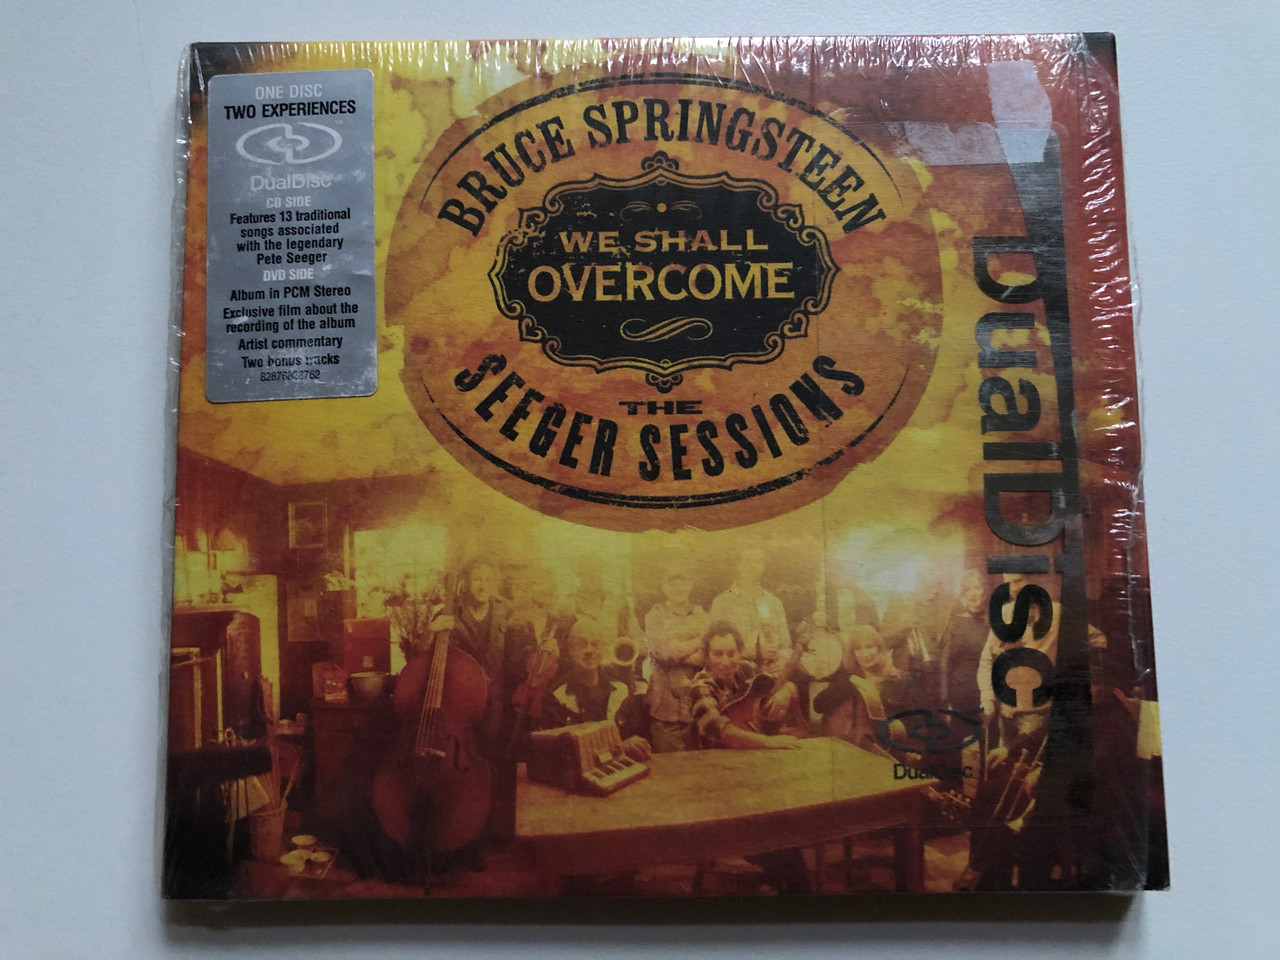 https://cdn10.bigcommerce.com/s-62bdpkt7pb/products/0/images/249996/Bruce_Springsteen_We_Shall_Overcome_The_Seeger_Sessions_Dual_Disc_-_CD_Side_Features_13_traditional_songs_associated_with_the_legendary_Pete_Seeger_DVD_Side_Album_in_PCM_Stereo_Co_1__93400.1661160945.1280.1280.JPG?c=2&_gl=1*w7fw9u*_ga*MjA2NTIxMjE2MC4xNTkwNTEyNTMy*_ga_WS2VZYPC6G*MTY2MTE1MDA1NS41MzMuMS4xNjYxMTYwODk0LjYwLjAuMA..